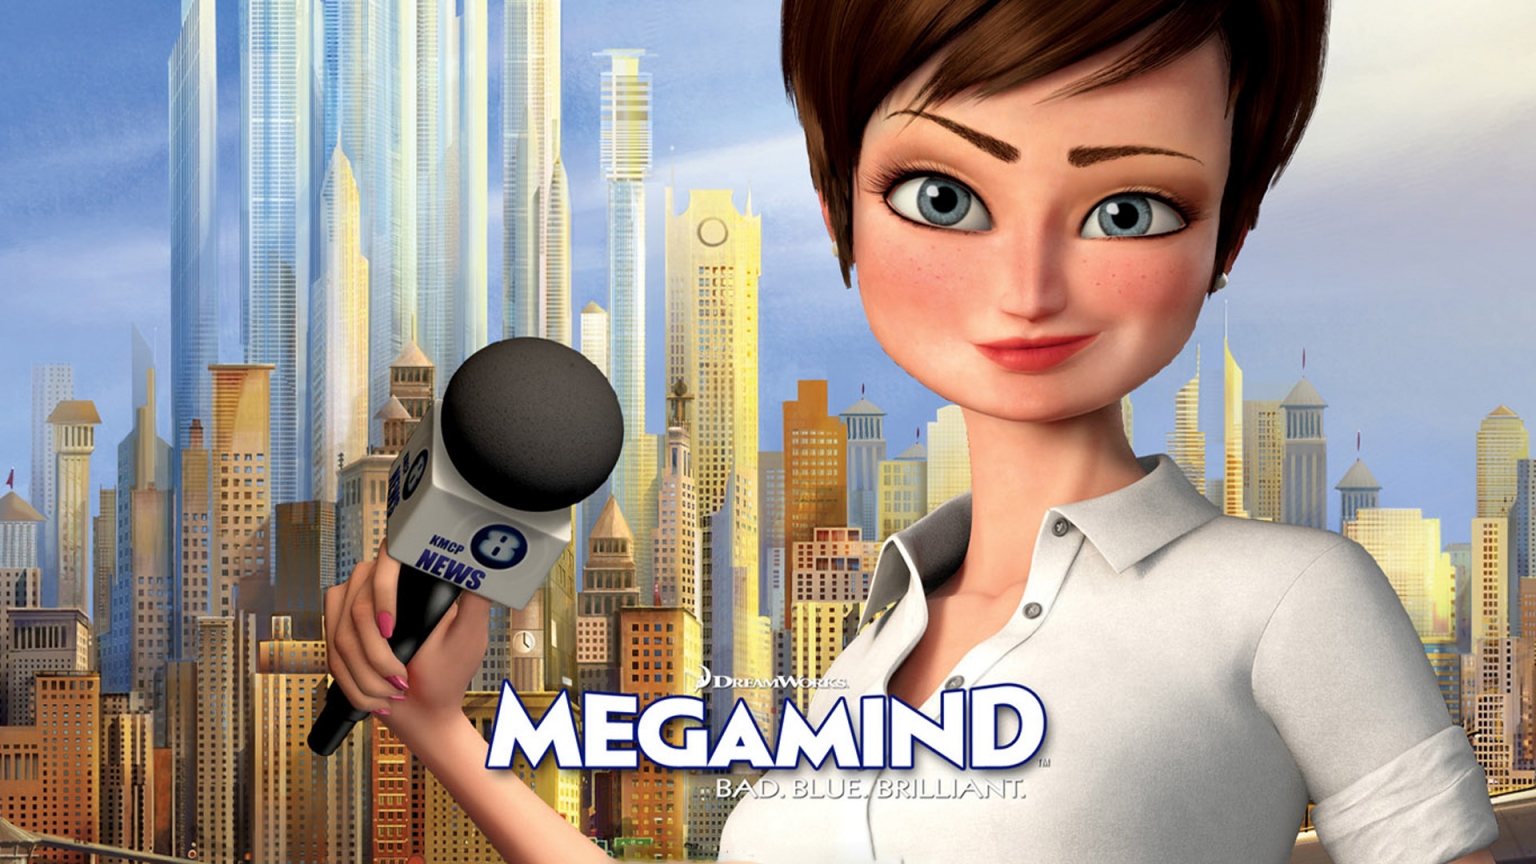 Megamind Roxanne Ritchie for 1536 x 864 HDTV resolution